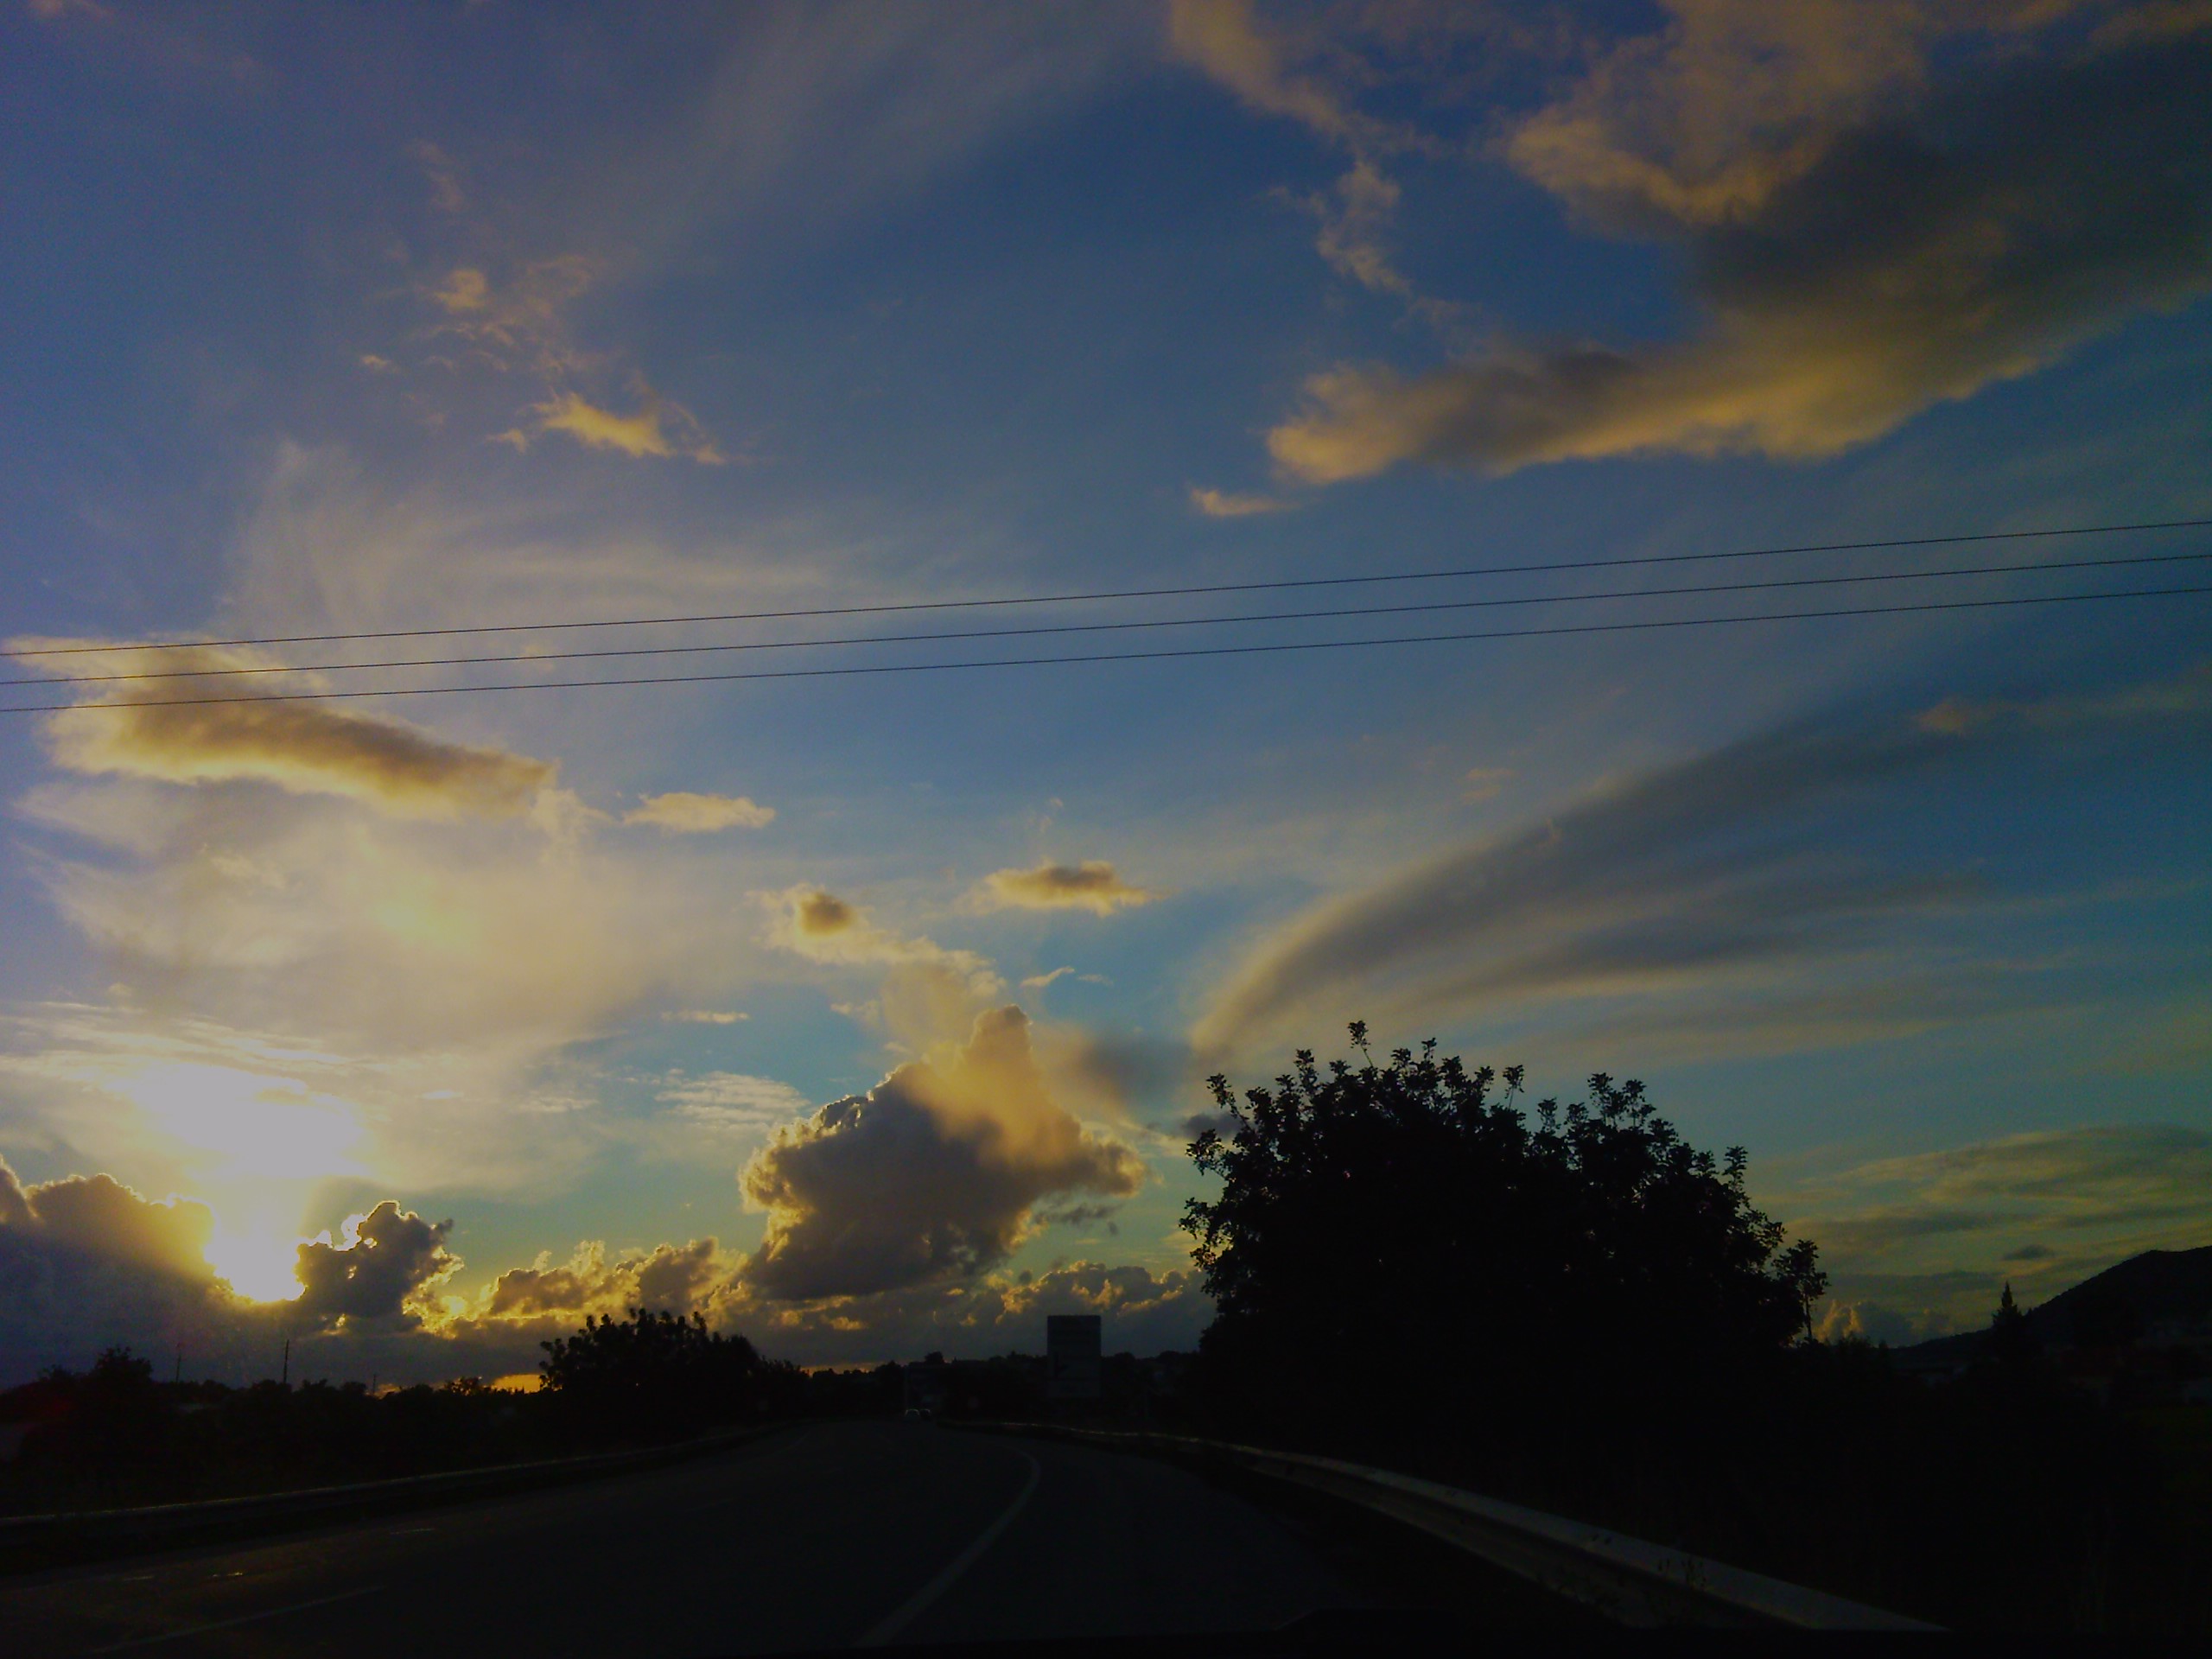 android earth, sunset, cloud, highway